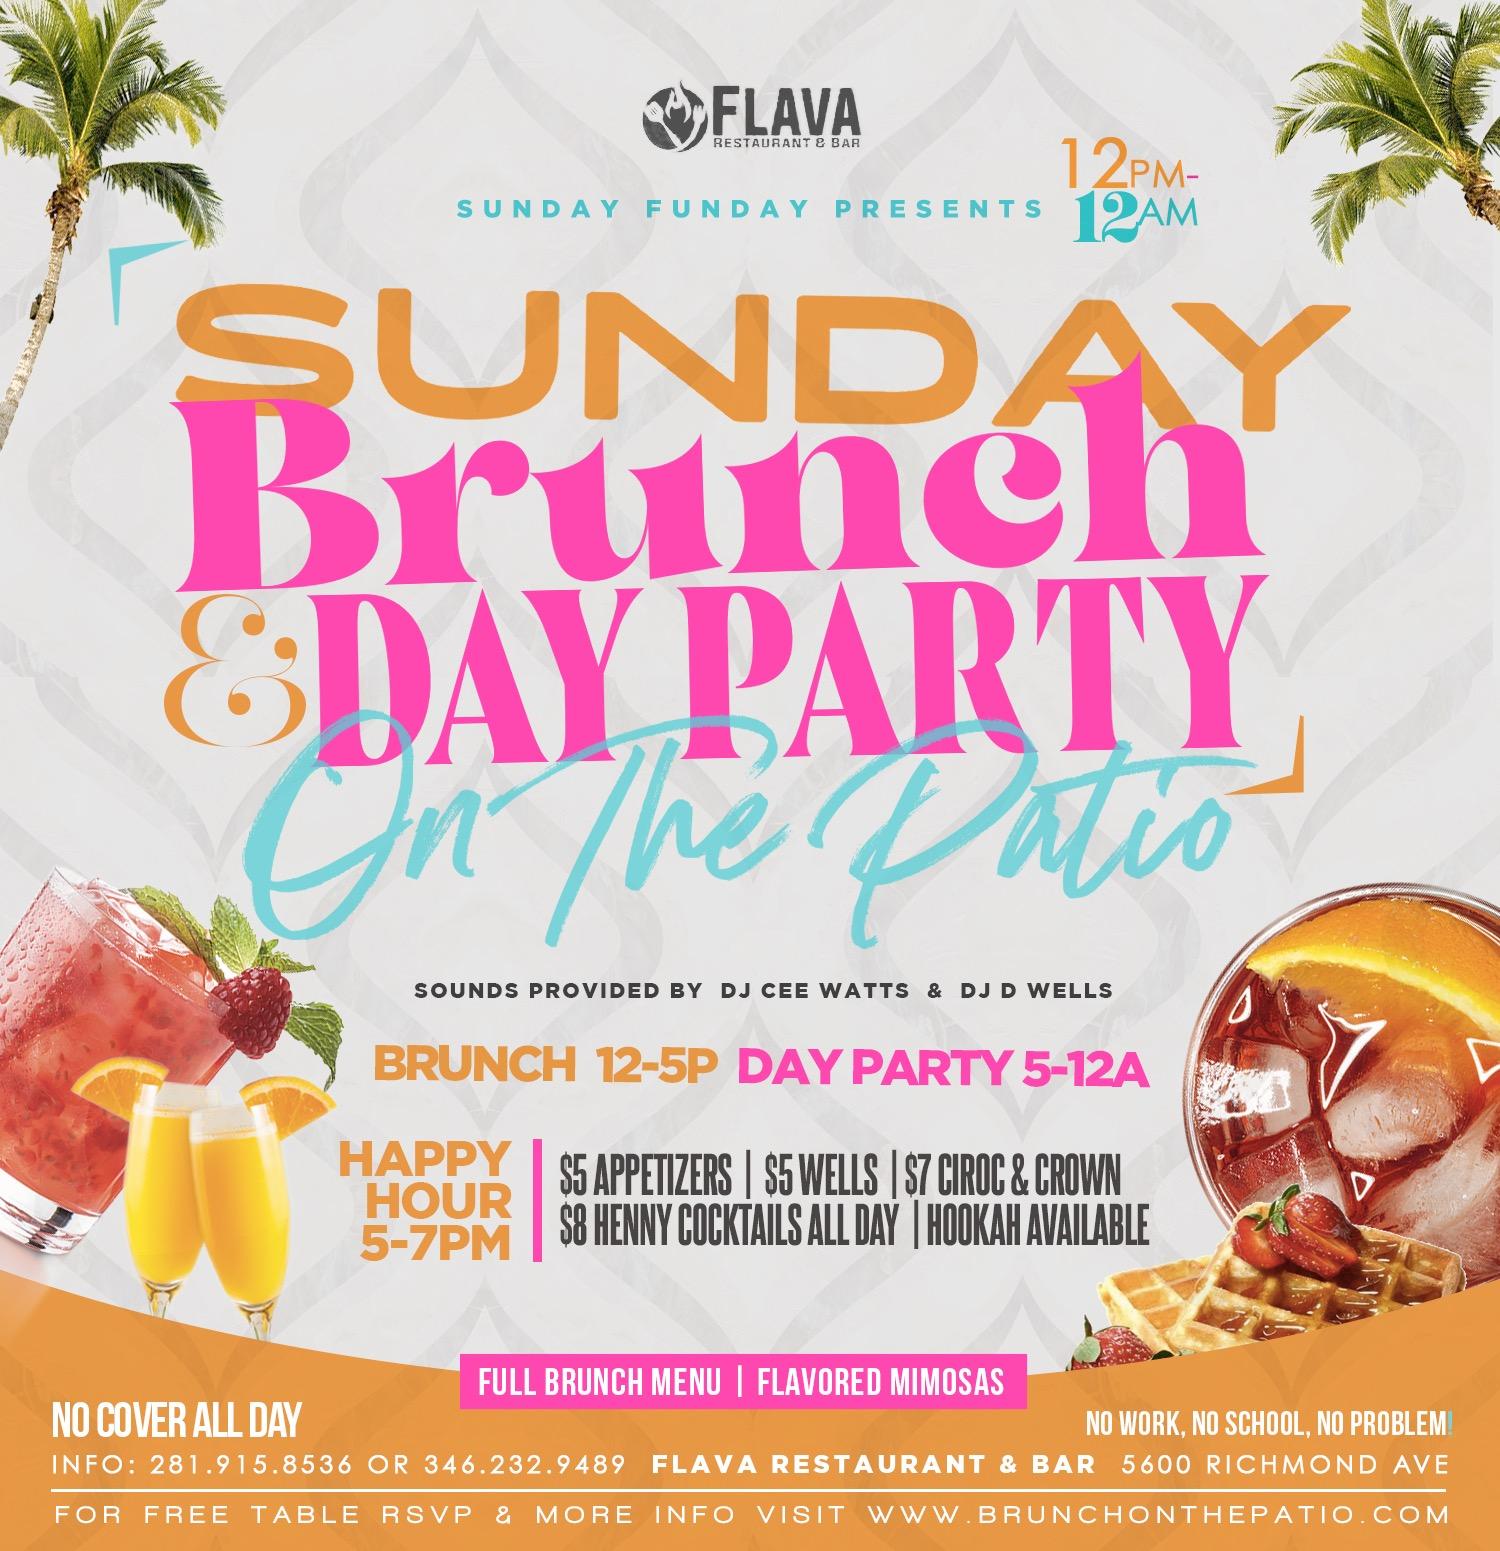 SUNDAY FUNDAY PRESENTS “SUNDAY BRUNCH & DAY PARTY” ON THE PATIO @ FLAVA